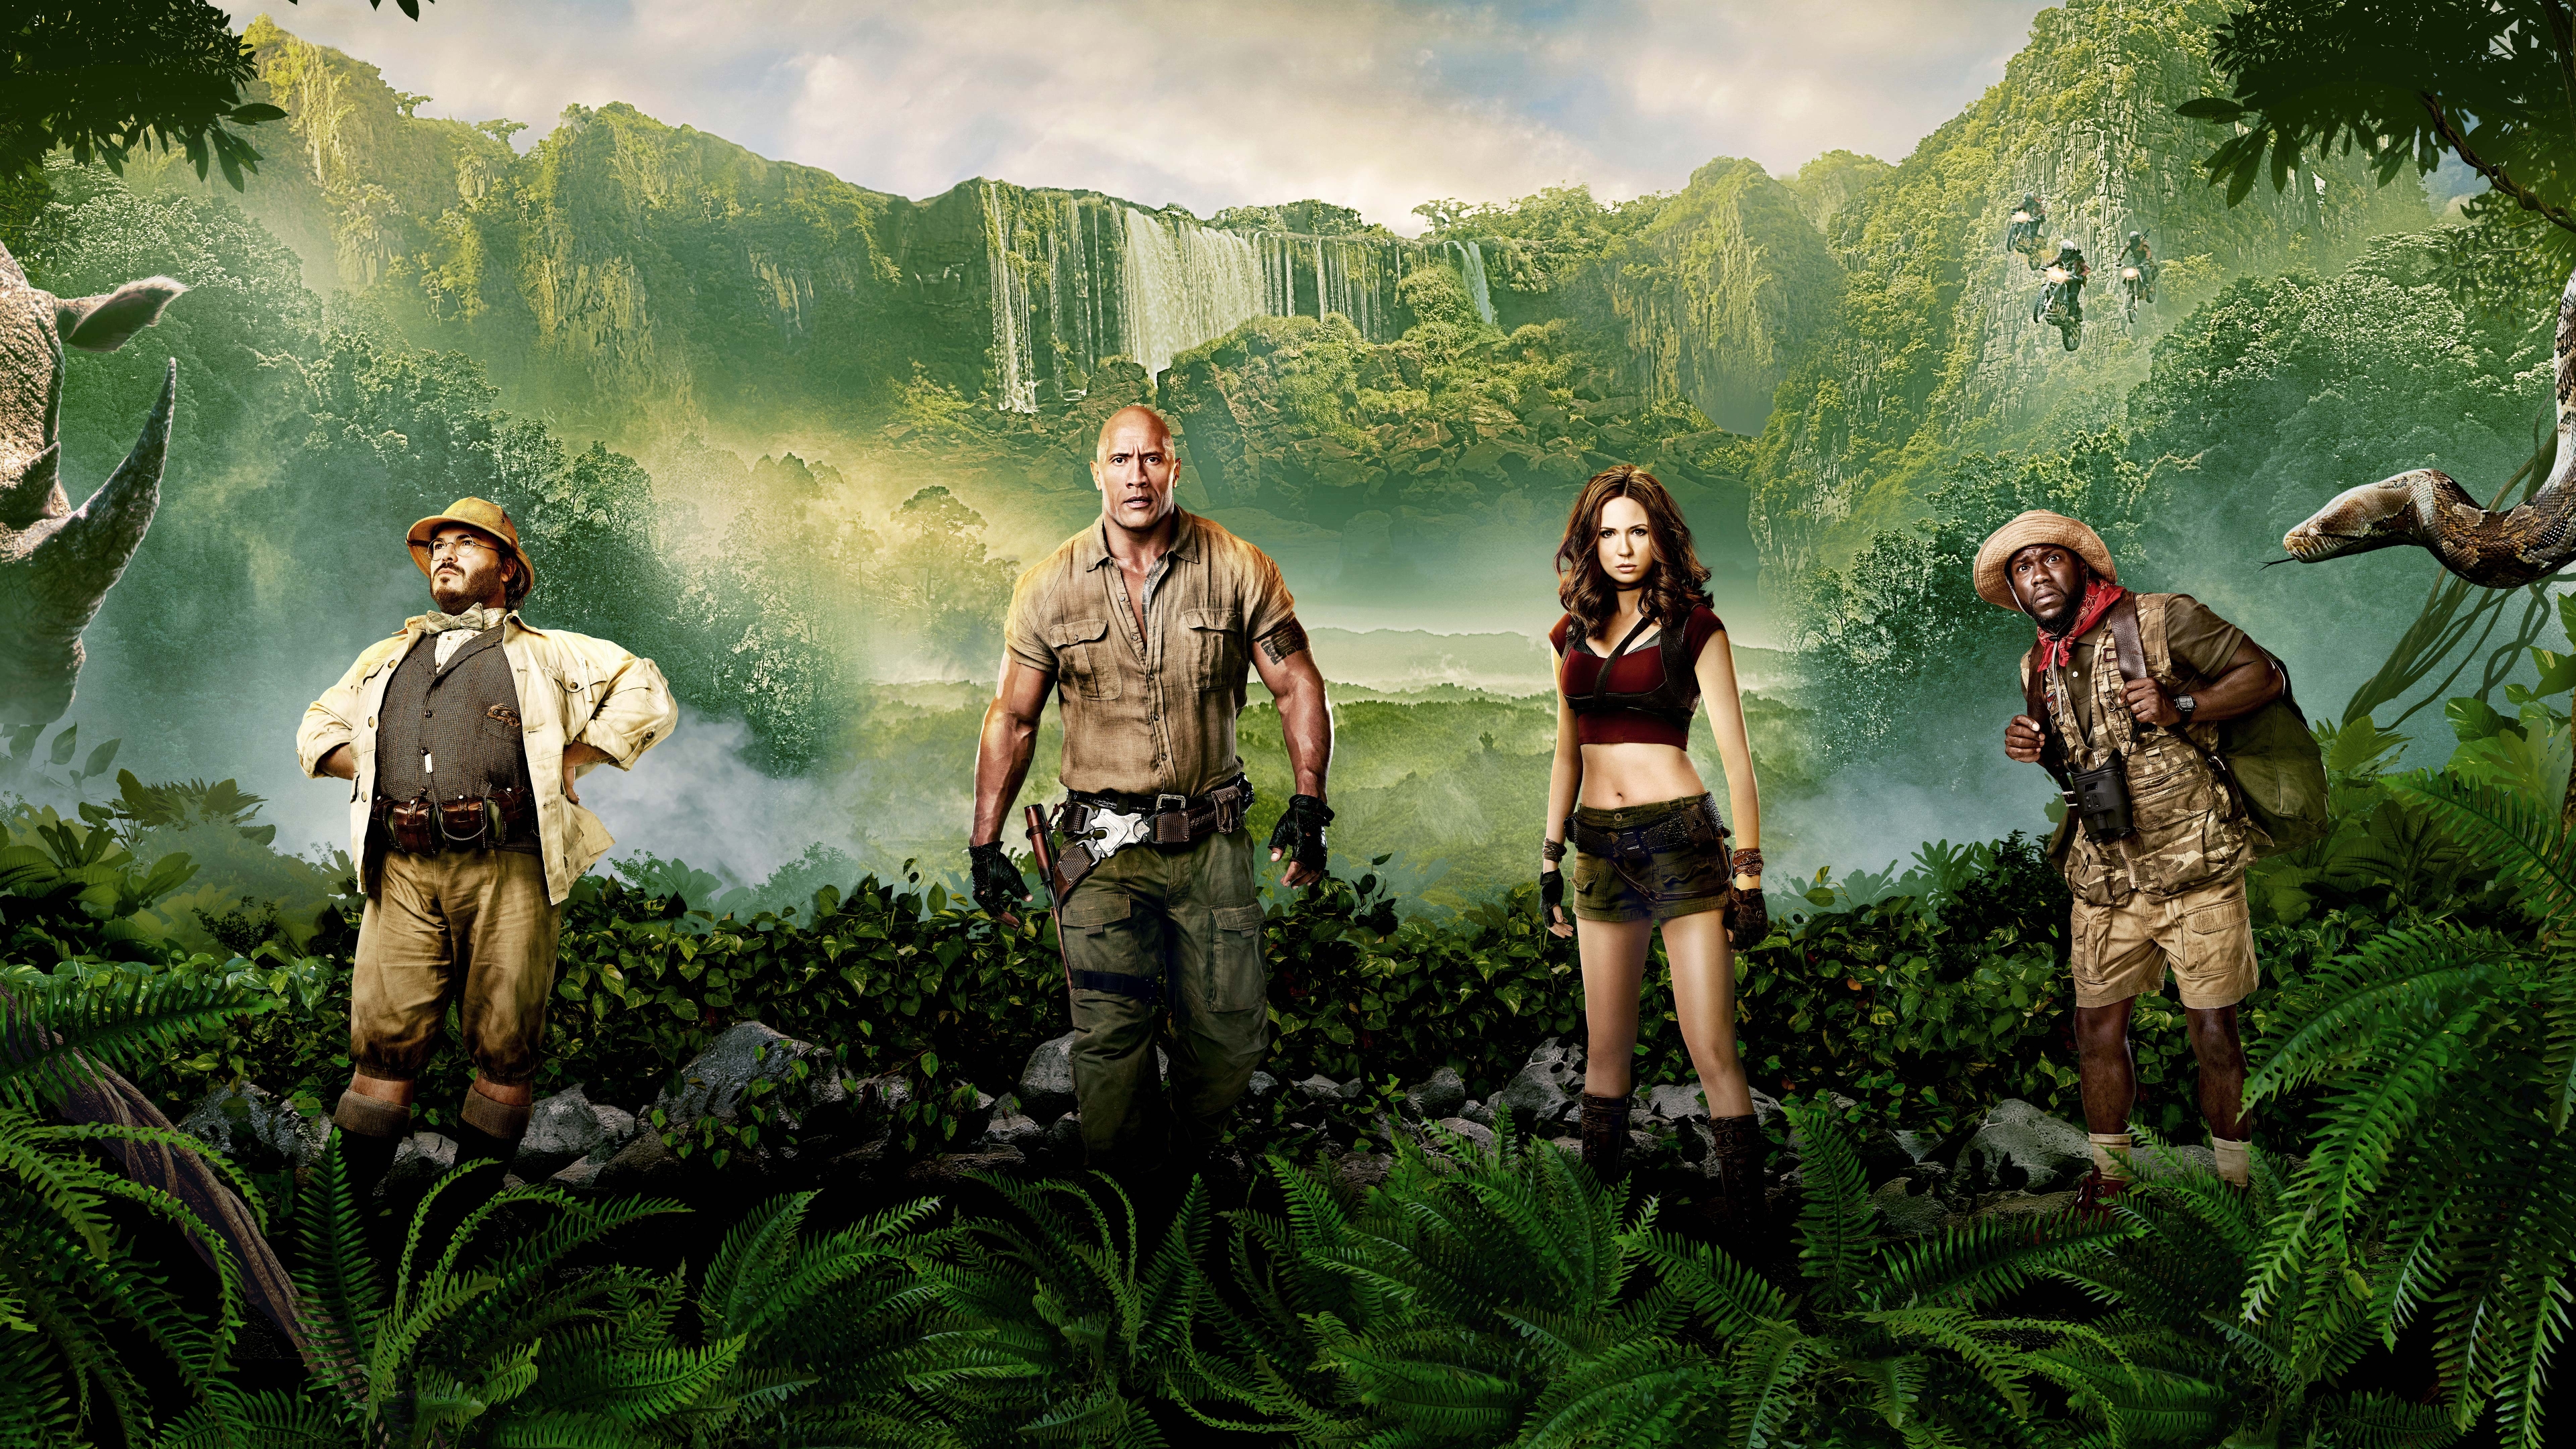 Jumanji Welcome to the Jungle Poster (3840x2160) Resolution Wallpaper.